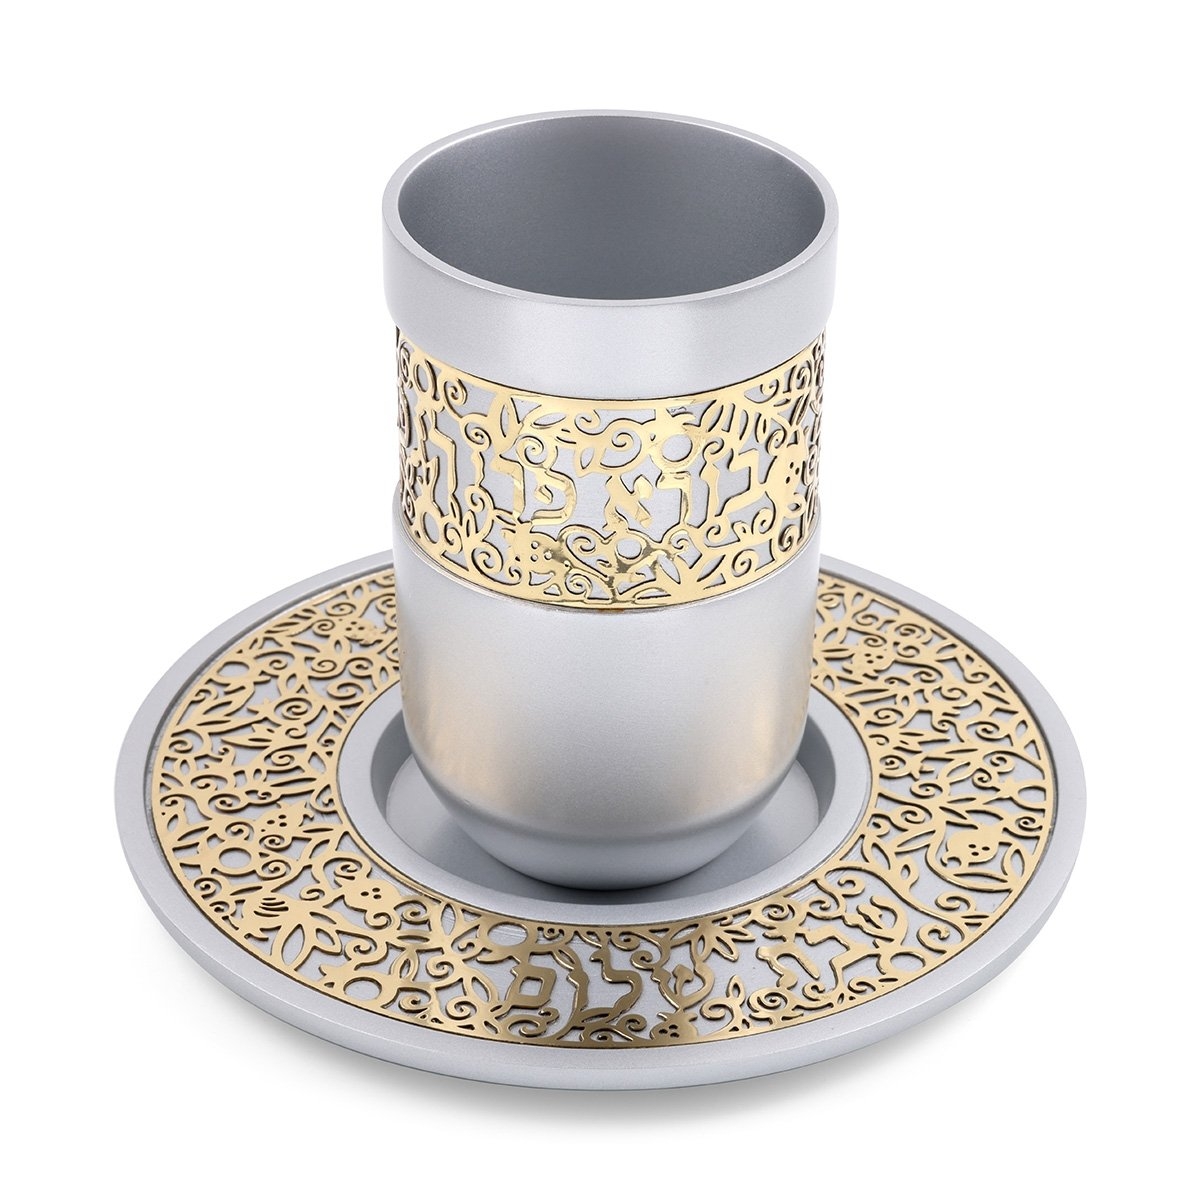 Personalized Shabbat Kiddush Cup with Saucer from Yair Emanuel - 2